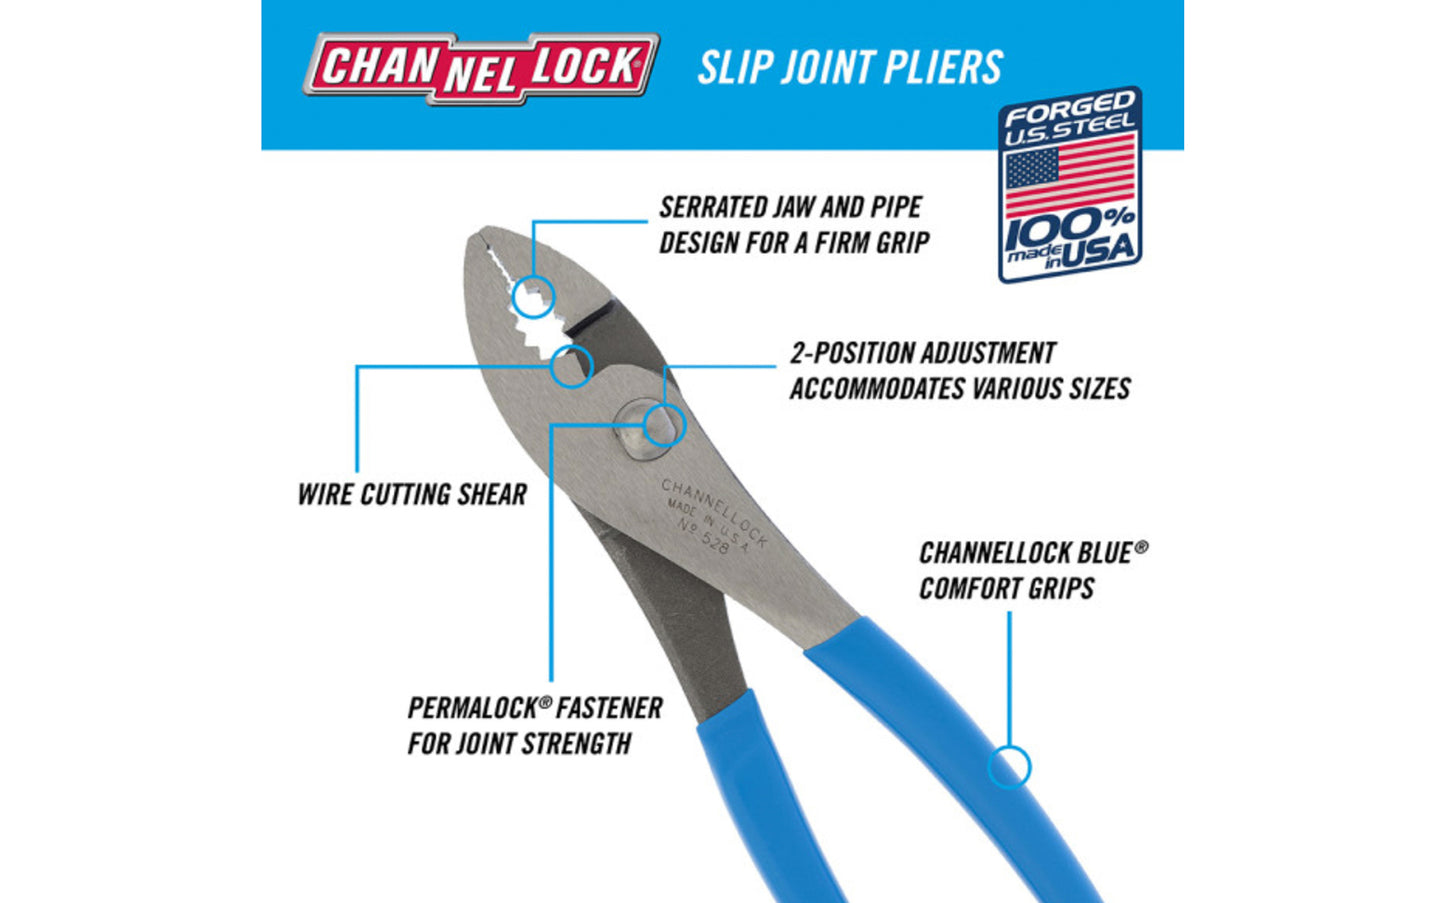 These 8" Channellock Slip Joint Pliers are versatile & easy to use. They feature a serrated jaw for a firm grip and an added wire cutting shear for soft wire. Channelock Slip Joint Pliers are made in USA and forged from high carbon U.S. steel that is specially coated for ultimate rust prevention. Model 528.